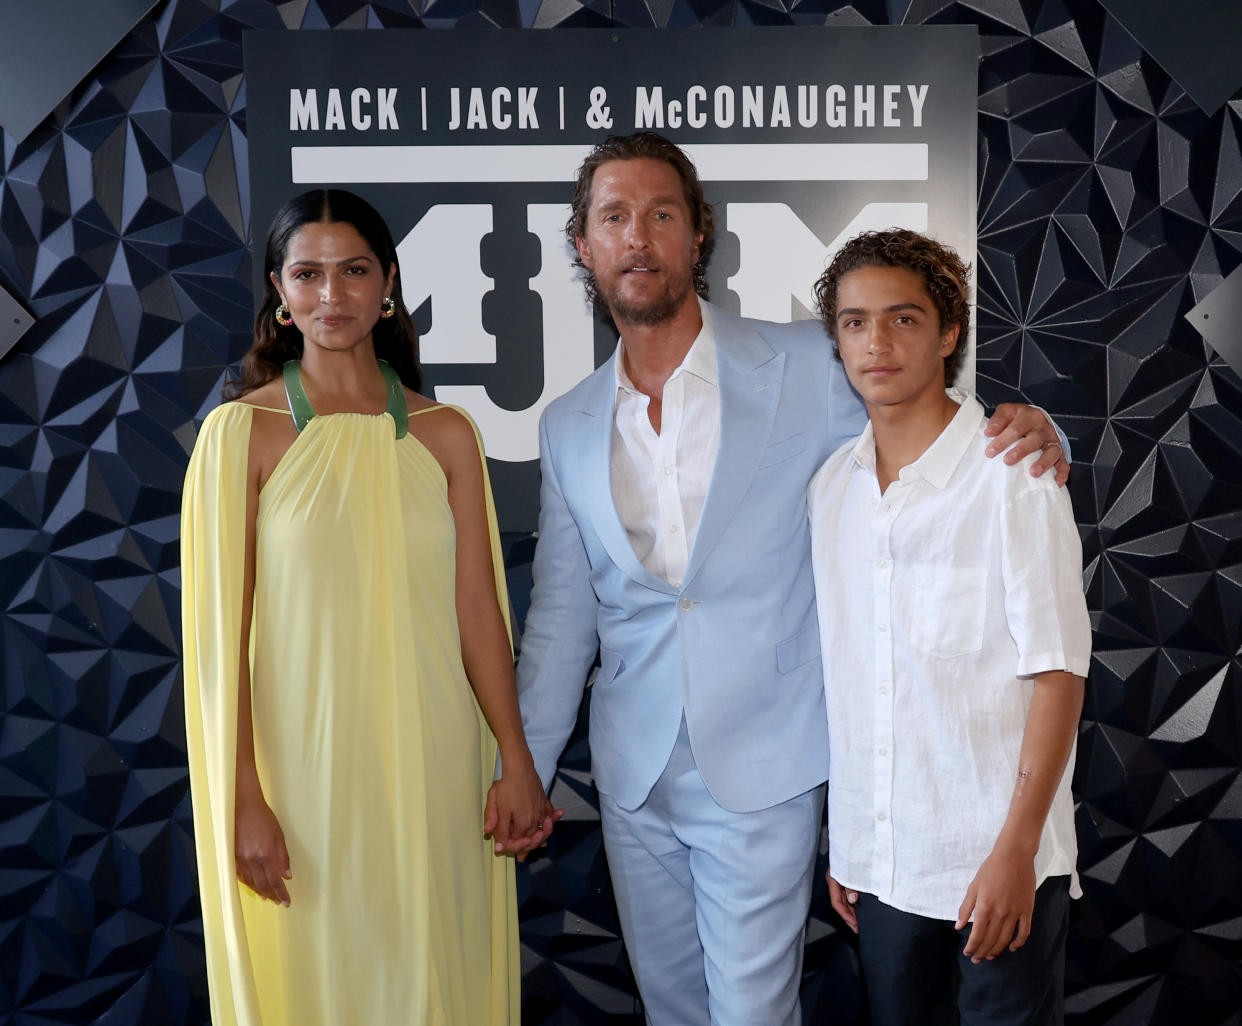 Levi McConaughey, the son of Matthew McConaughey and Camila Alves, has joined Instagram. (Photo: Gary Miller/WireImage)